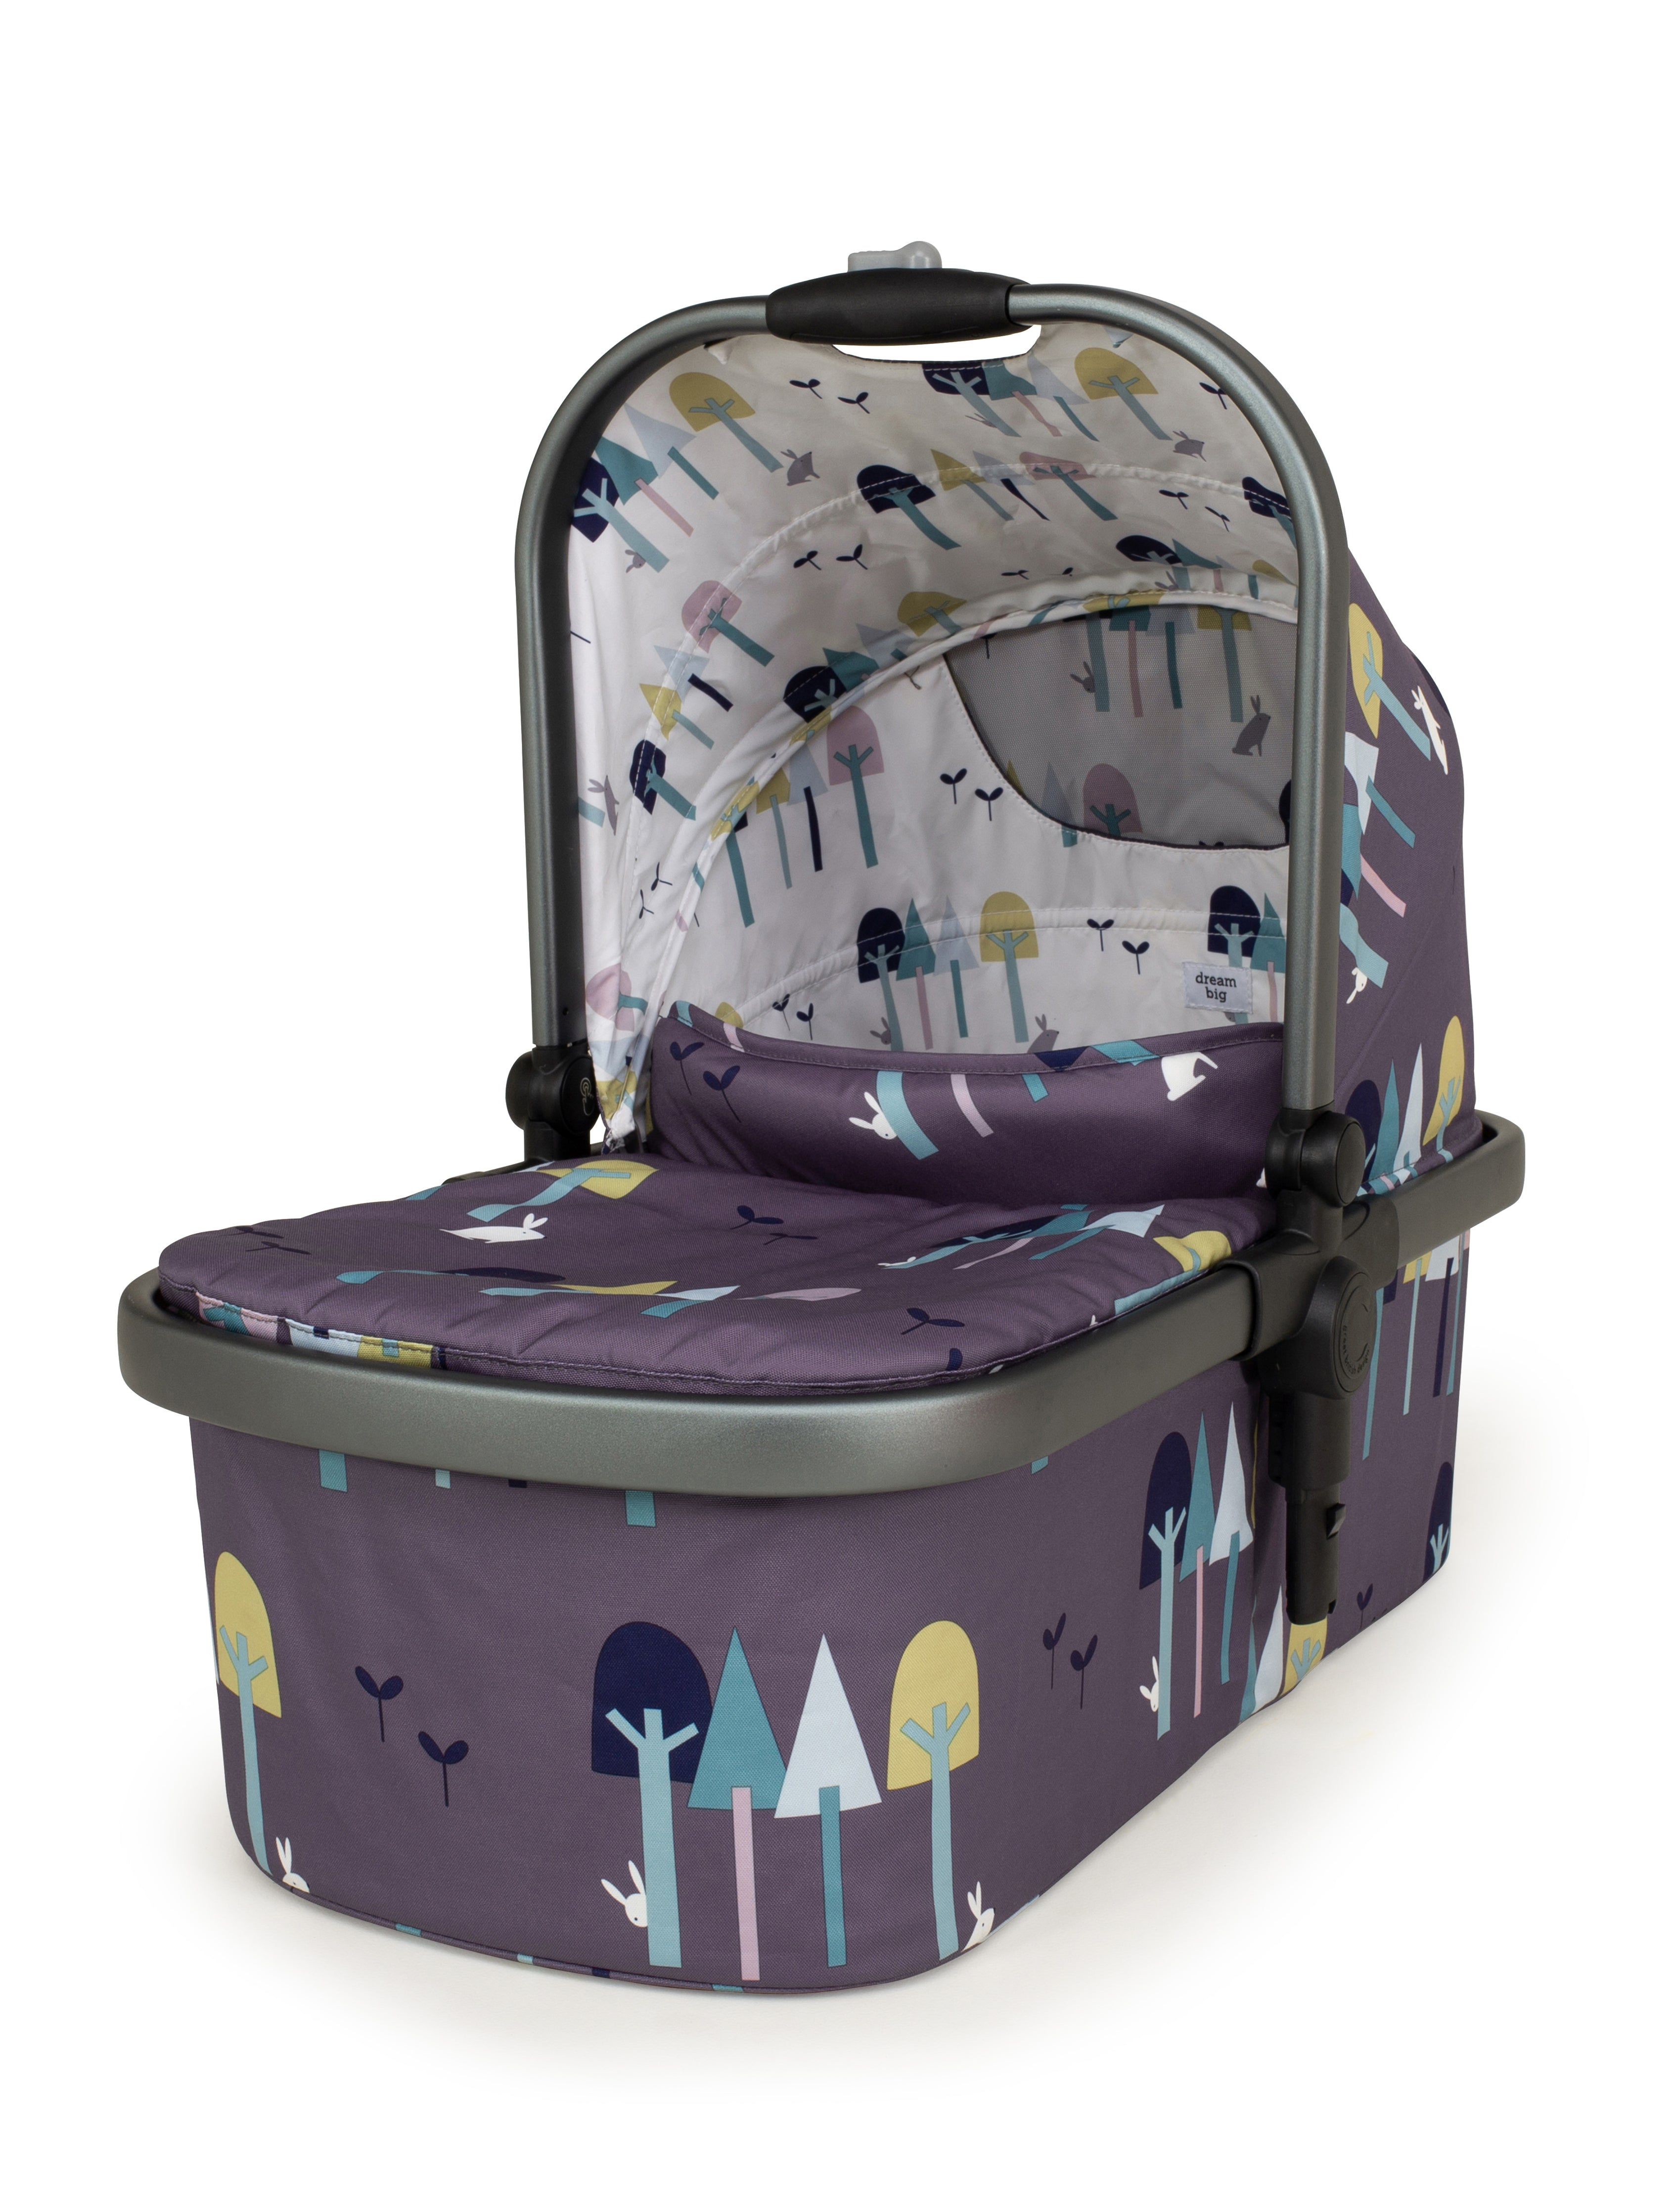 Wow 2 Car Seat and i-Size Base Bundle Wilderness